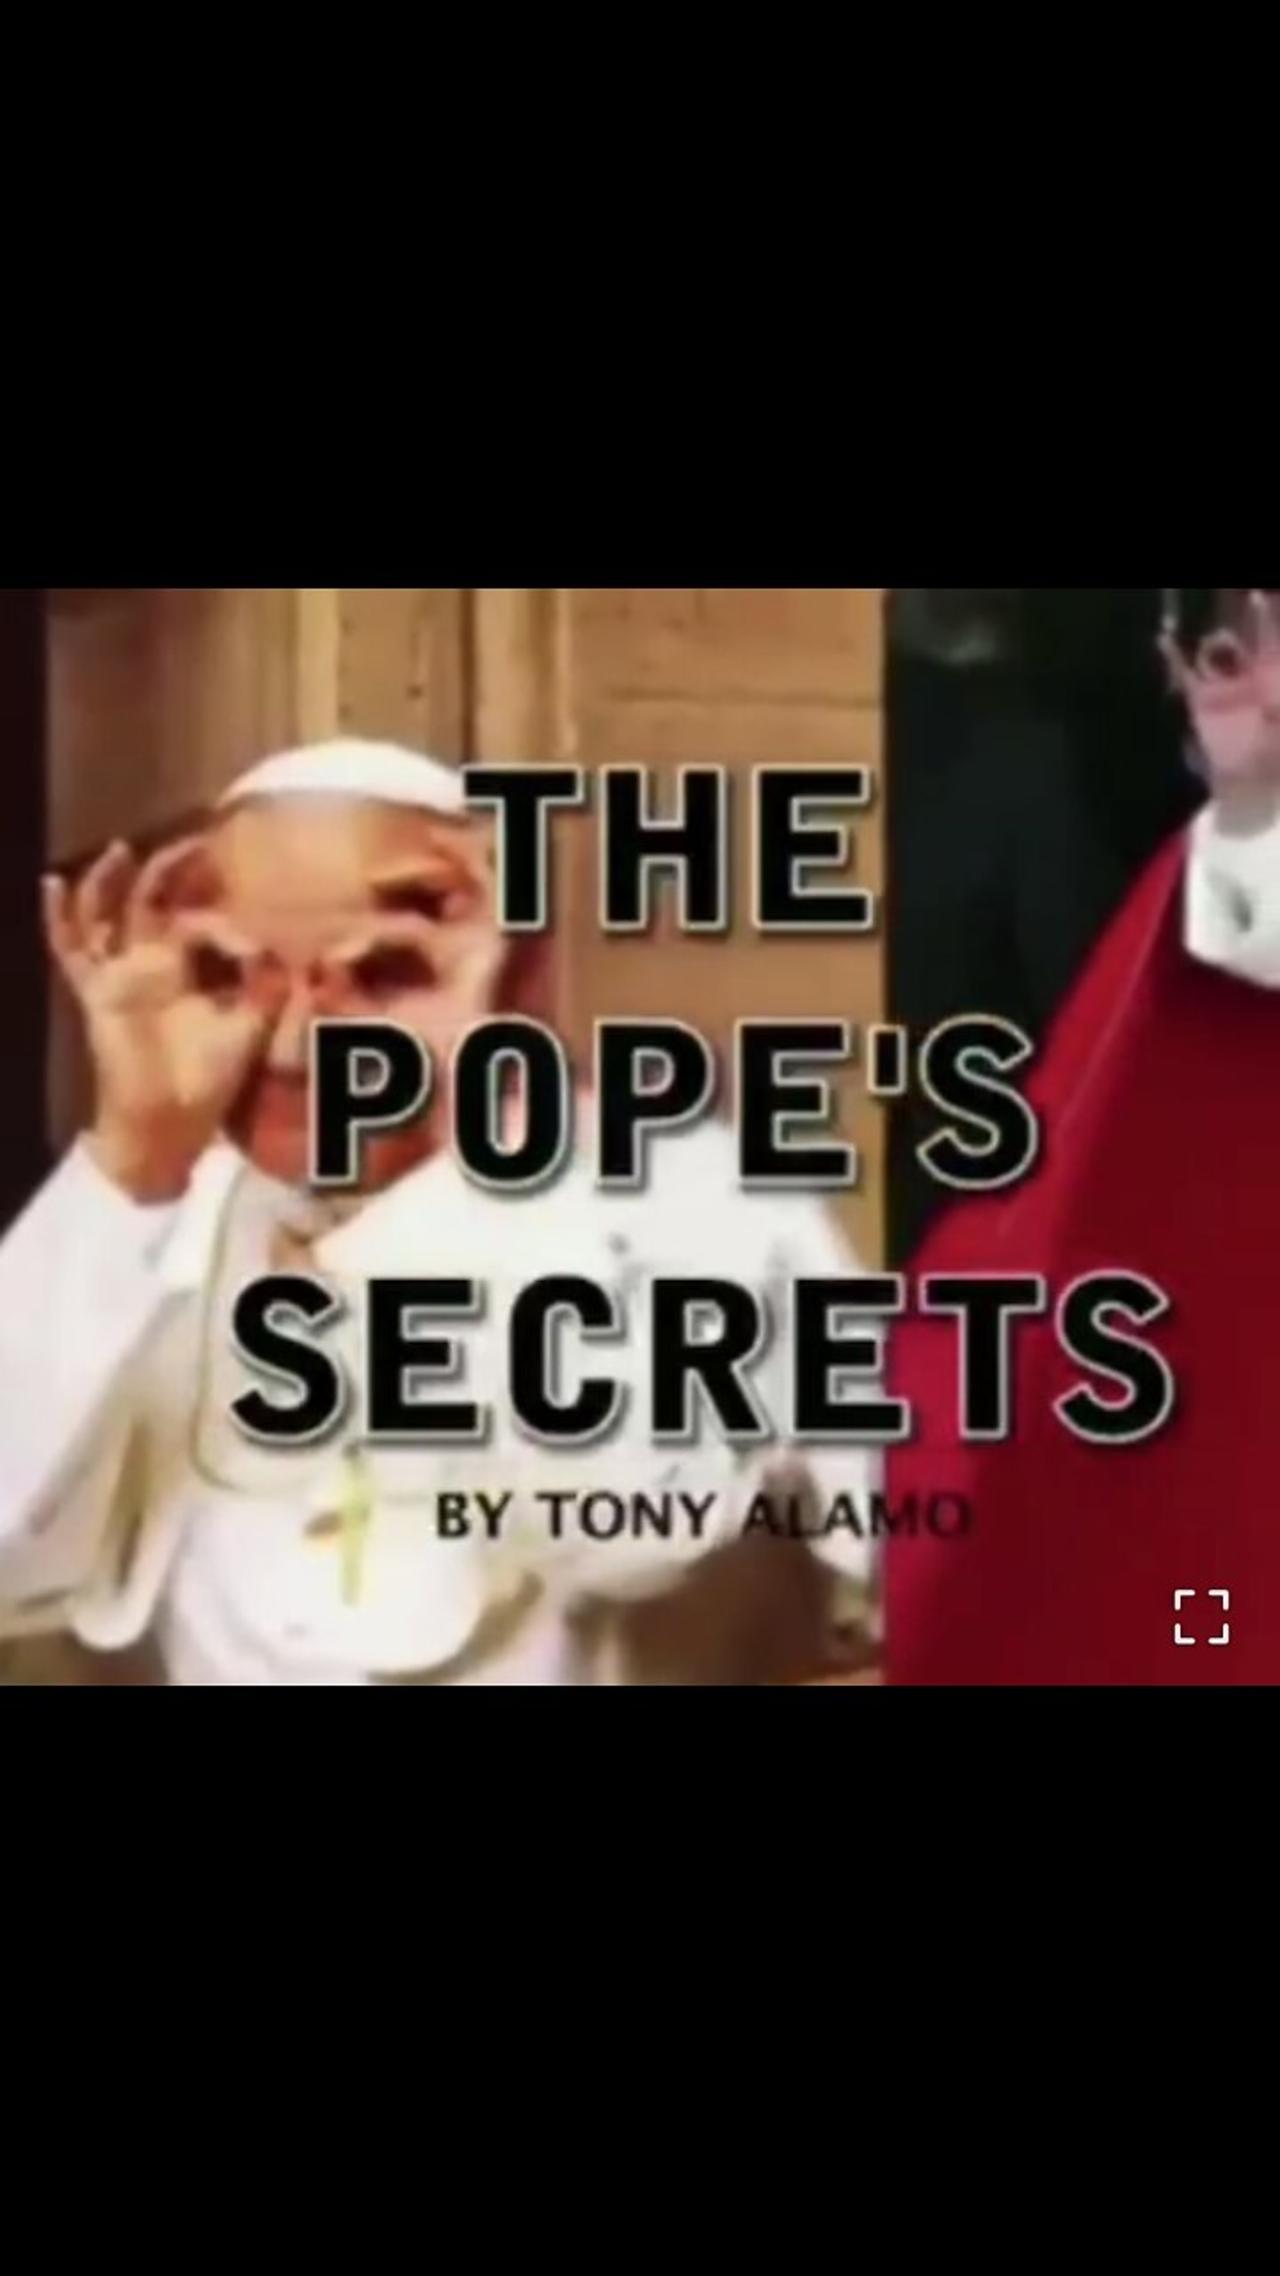 THE POPE'S SECRET - the role the Vatican plays in the cabal